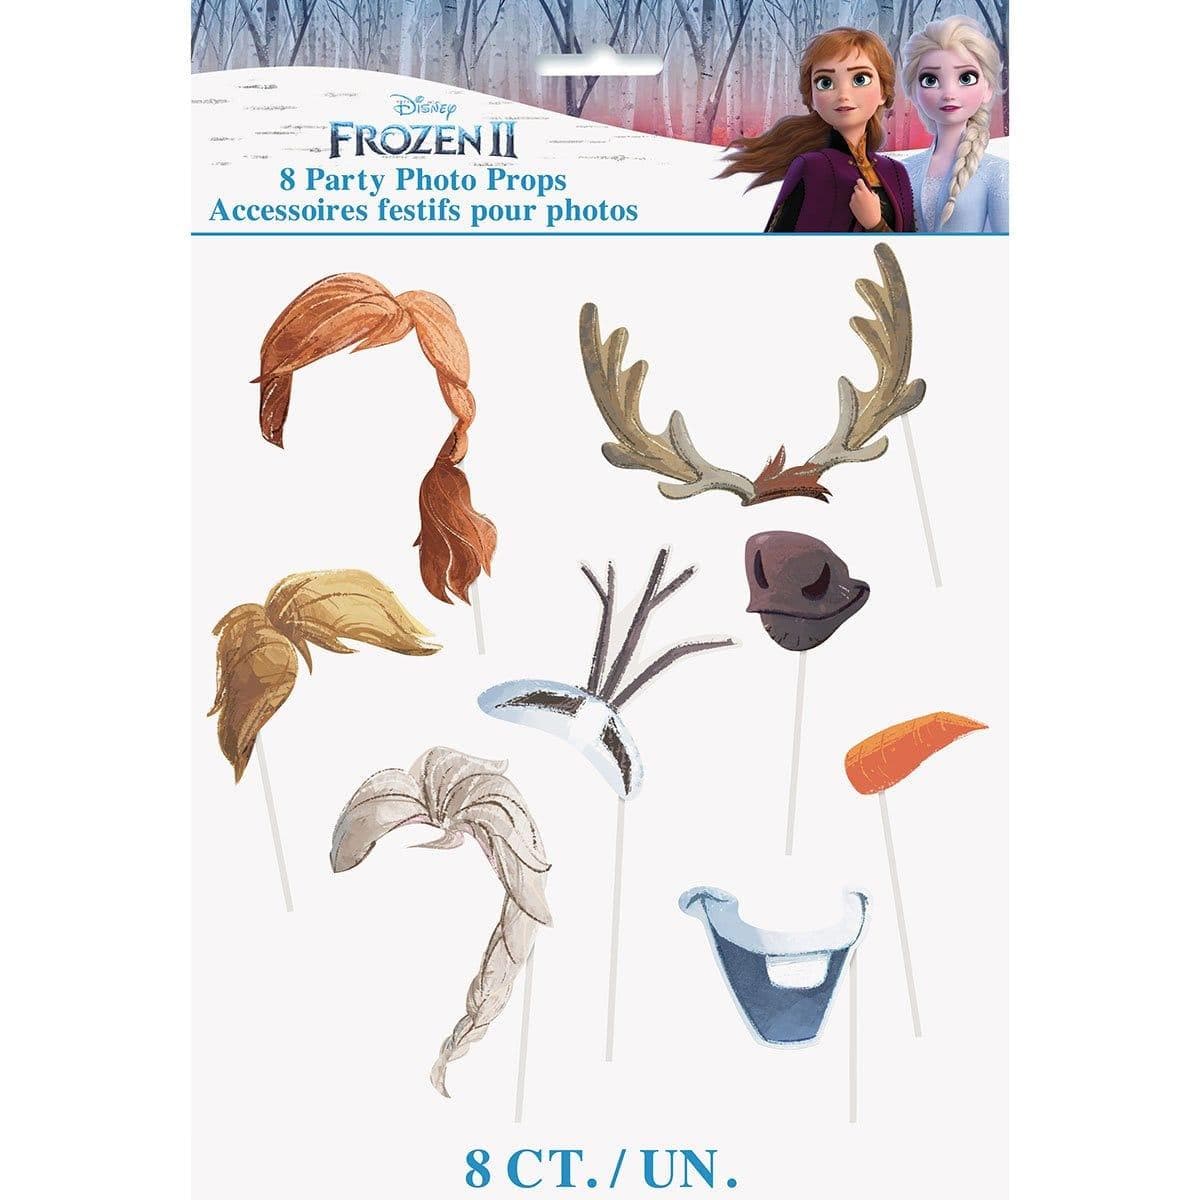 Buy Kids Birthday Frozen 2 photo booth props, 8 per package sold at Party Expert